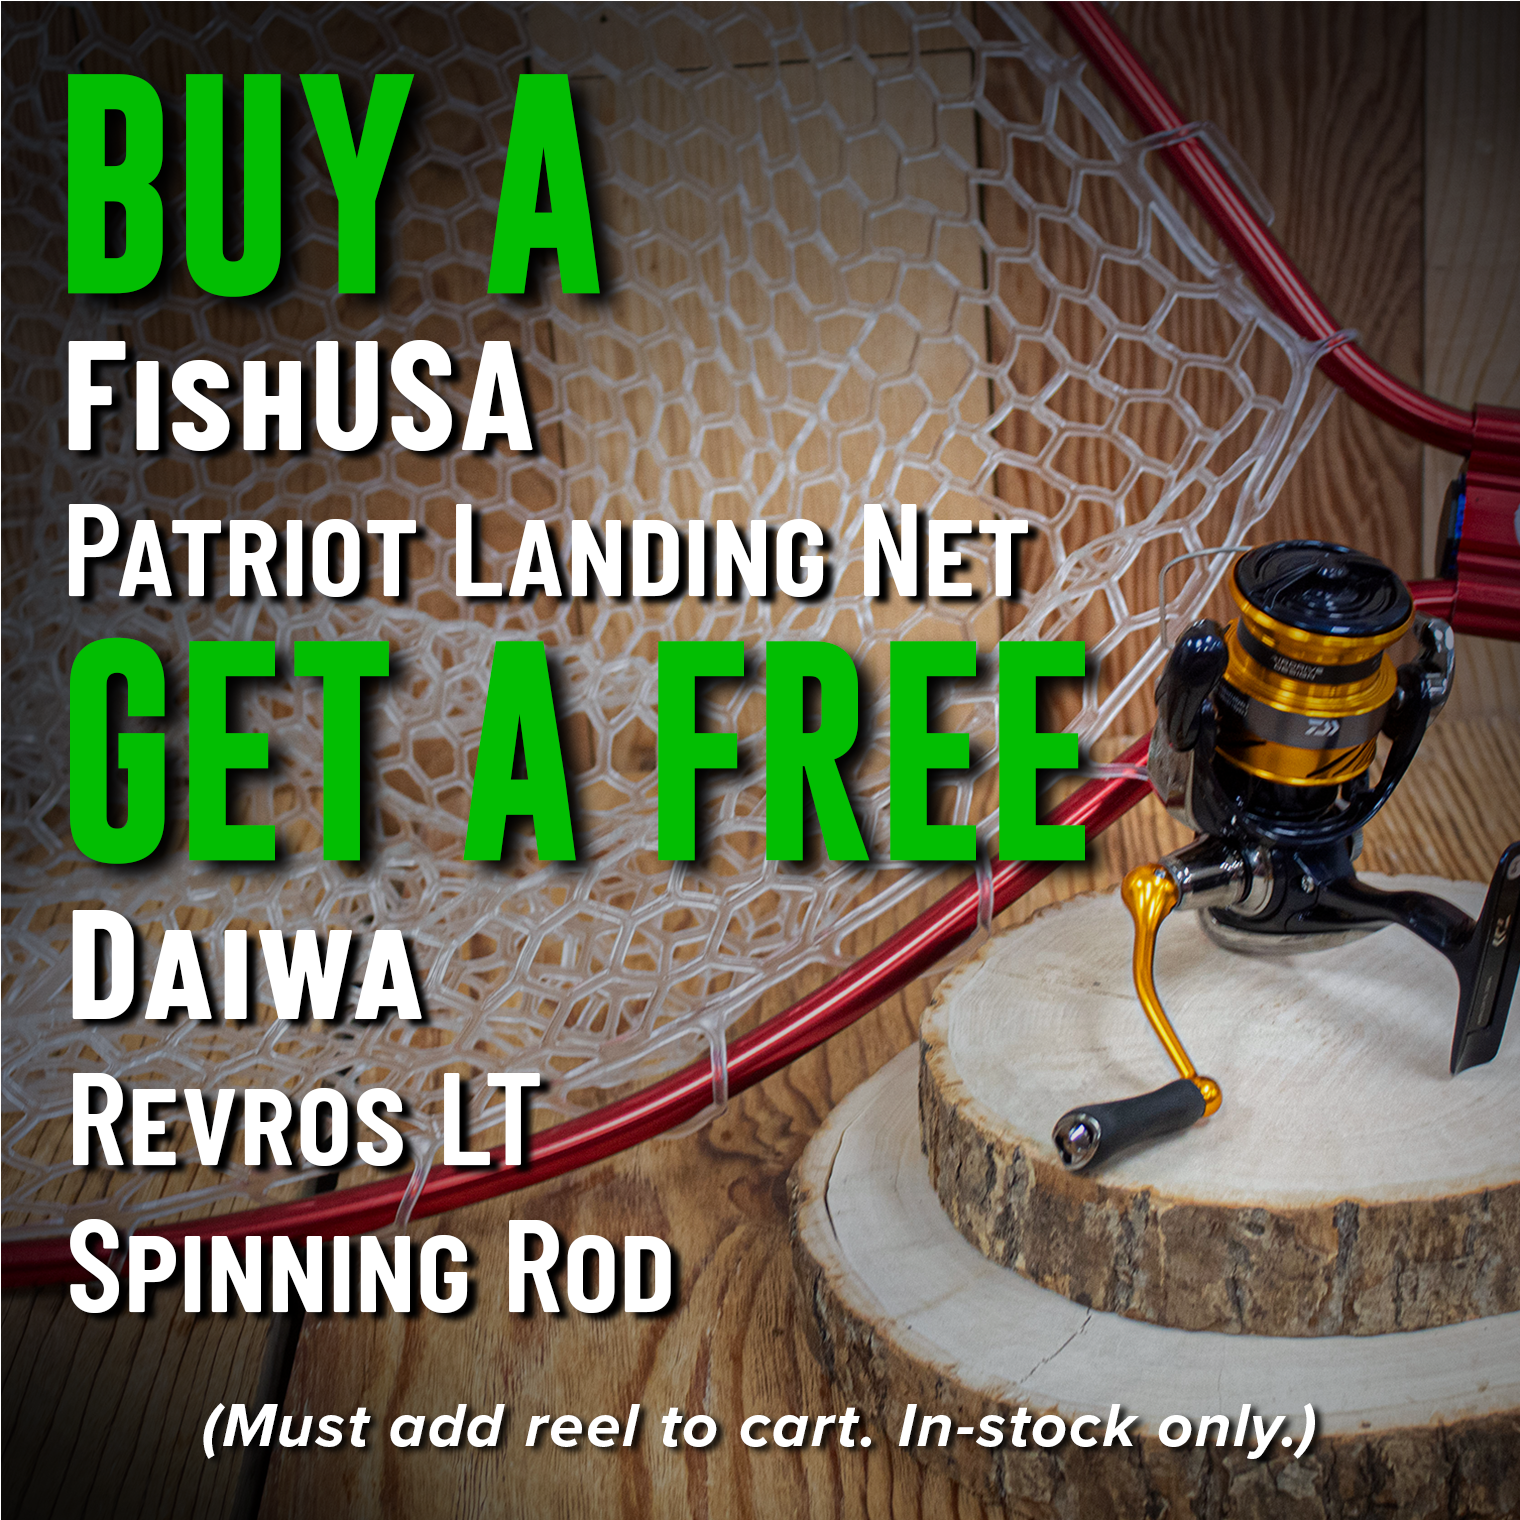 Buy a FishUSA Patriot Landing Net Get a Free Daiwa Revros LT Spinning Rod (Must add reel to cart. In-stock only.)